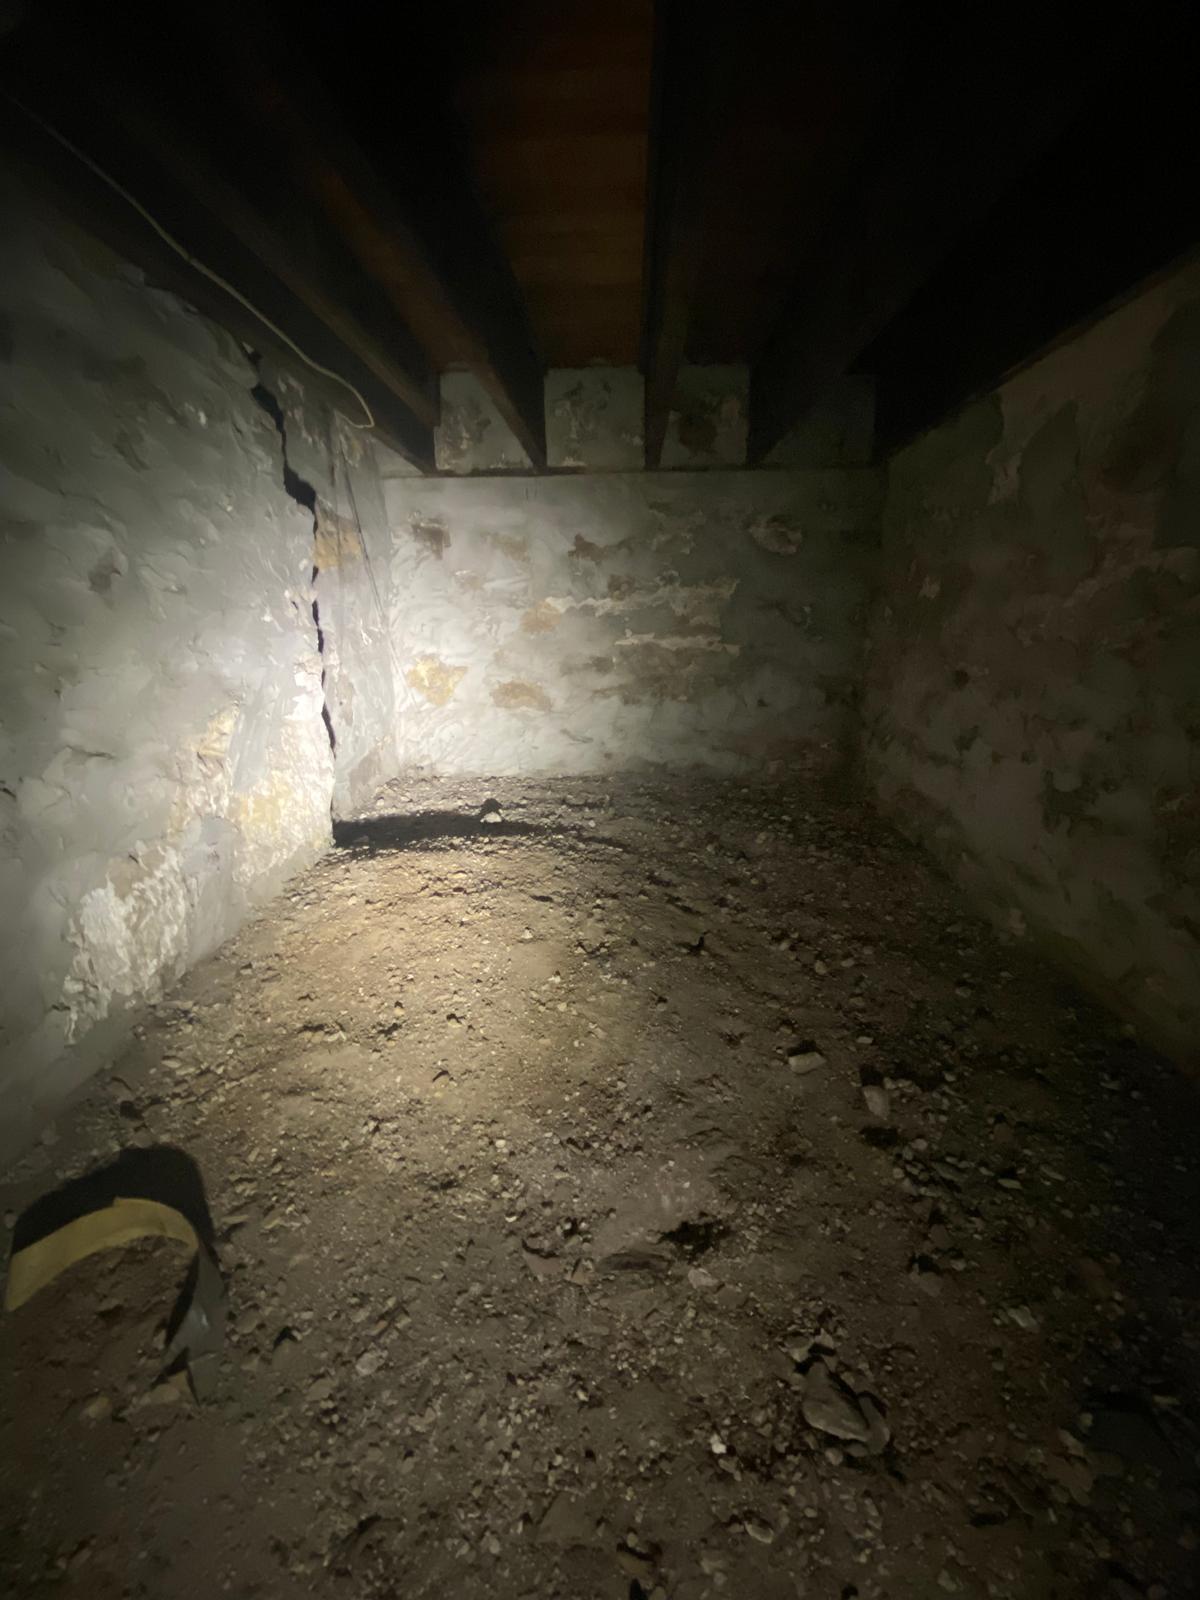 The hidden room in the manor's basement. (Courtesy of <a href="https://www.facebook.com/profile.php?id=100076974185503">Krasnesky Manor for Wayward Cats</a>)